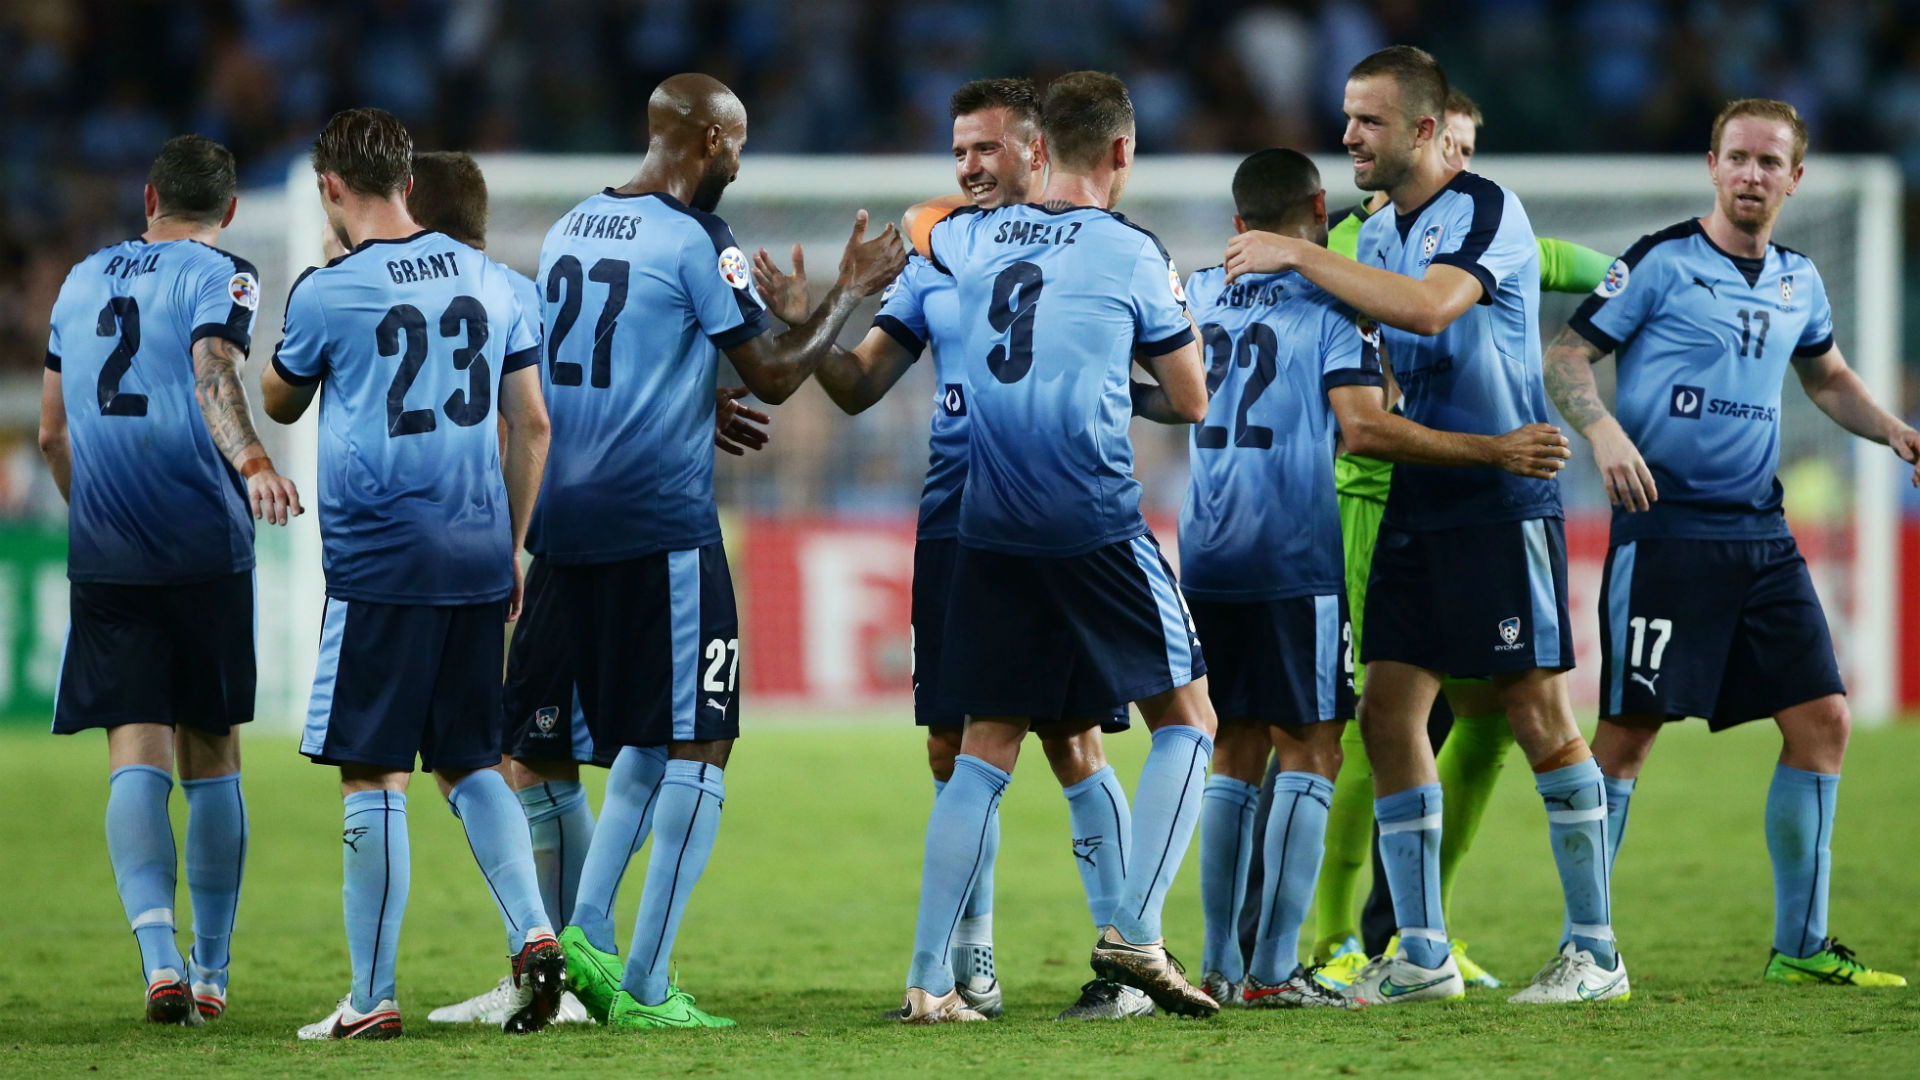 AFC Champions League Review: Sydney see off holders Guangzhou Taobao Evergrande